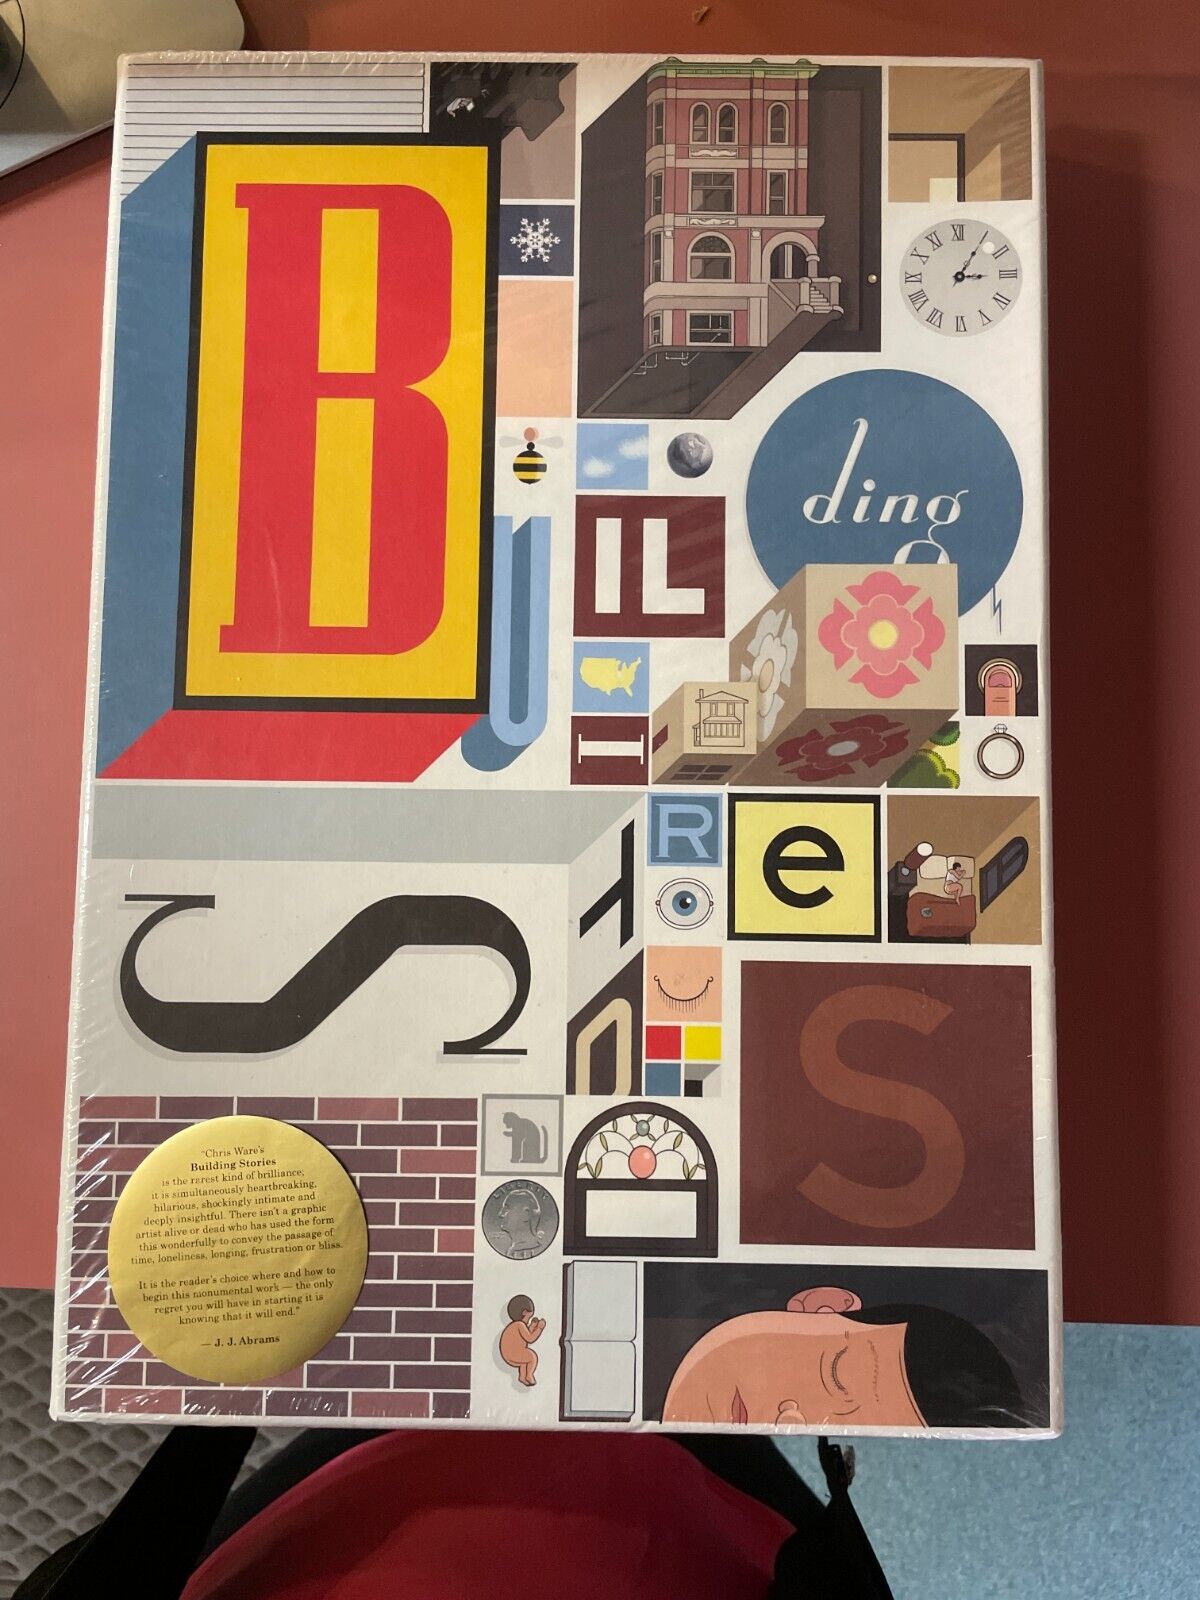 Pantheon Graphic Novels: Building Stories by Chris Ware *New Sealed*